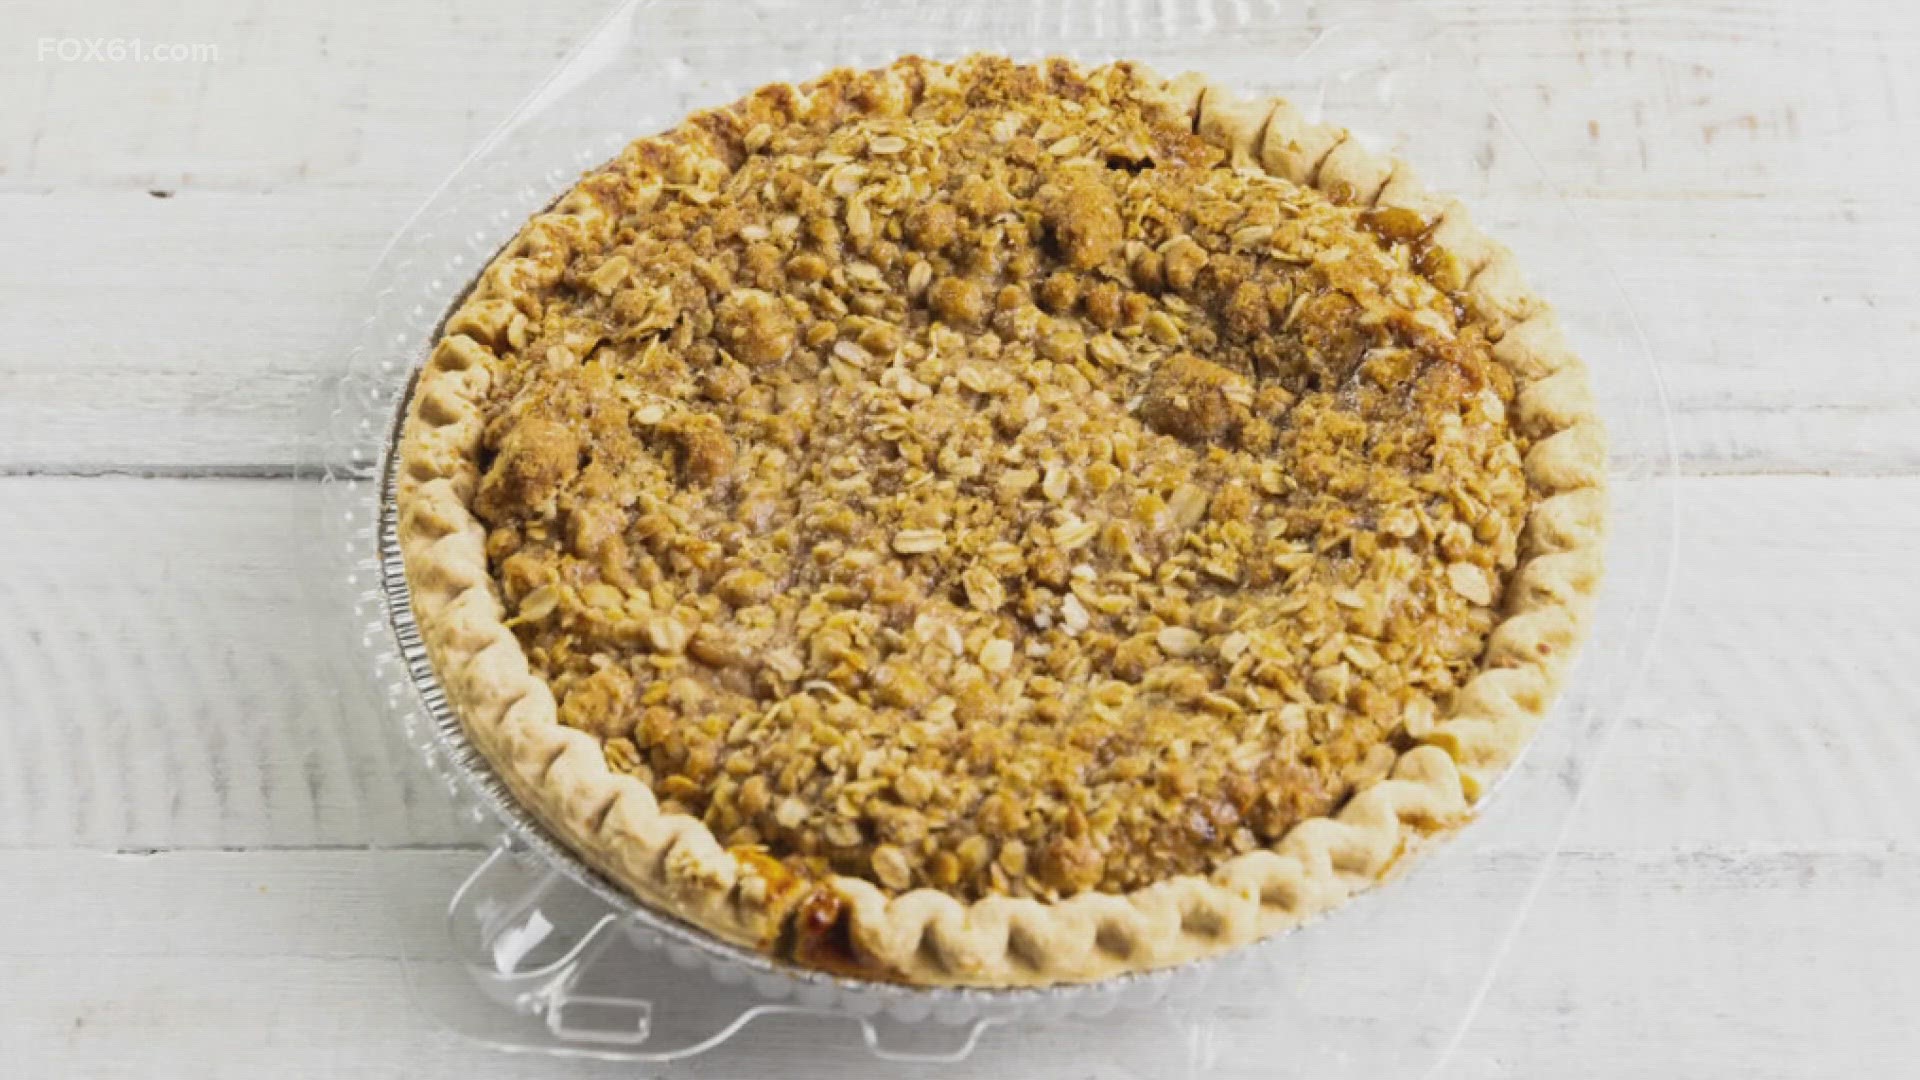 Apple crisp made with Honeycrisp apples may contain undeclared milk, and the no-sugar-added apple pie may have undeclared eggs.